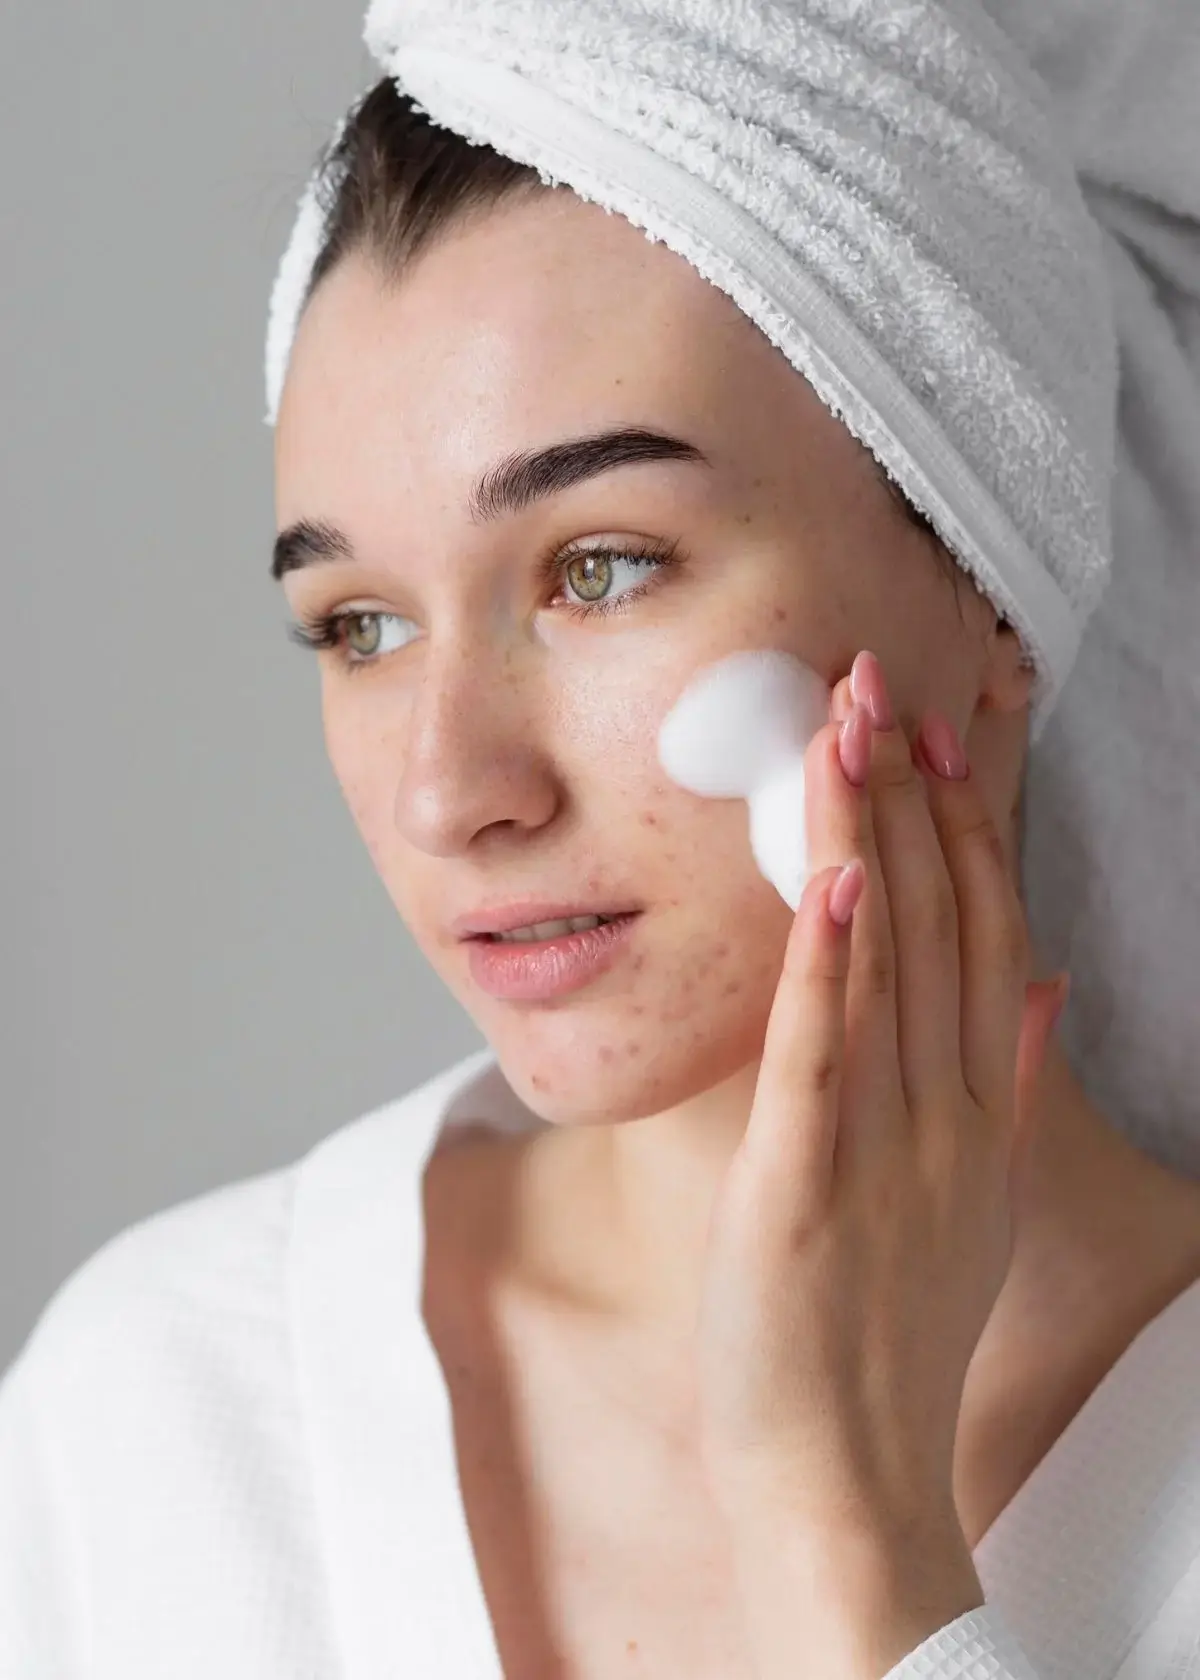 How to choose the right moisturizer for fungal acne?